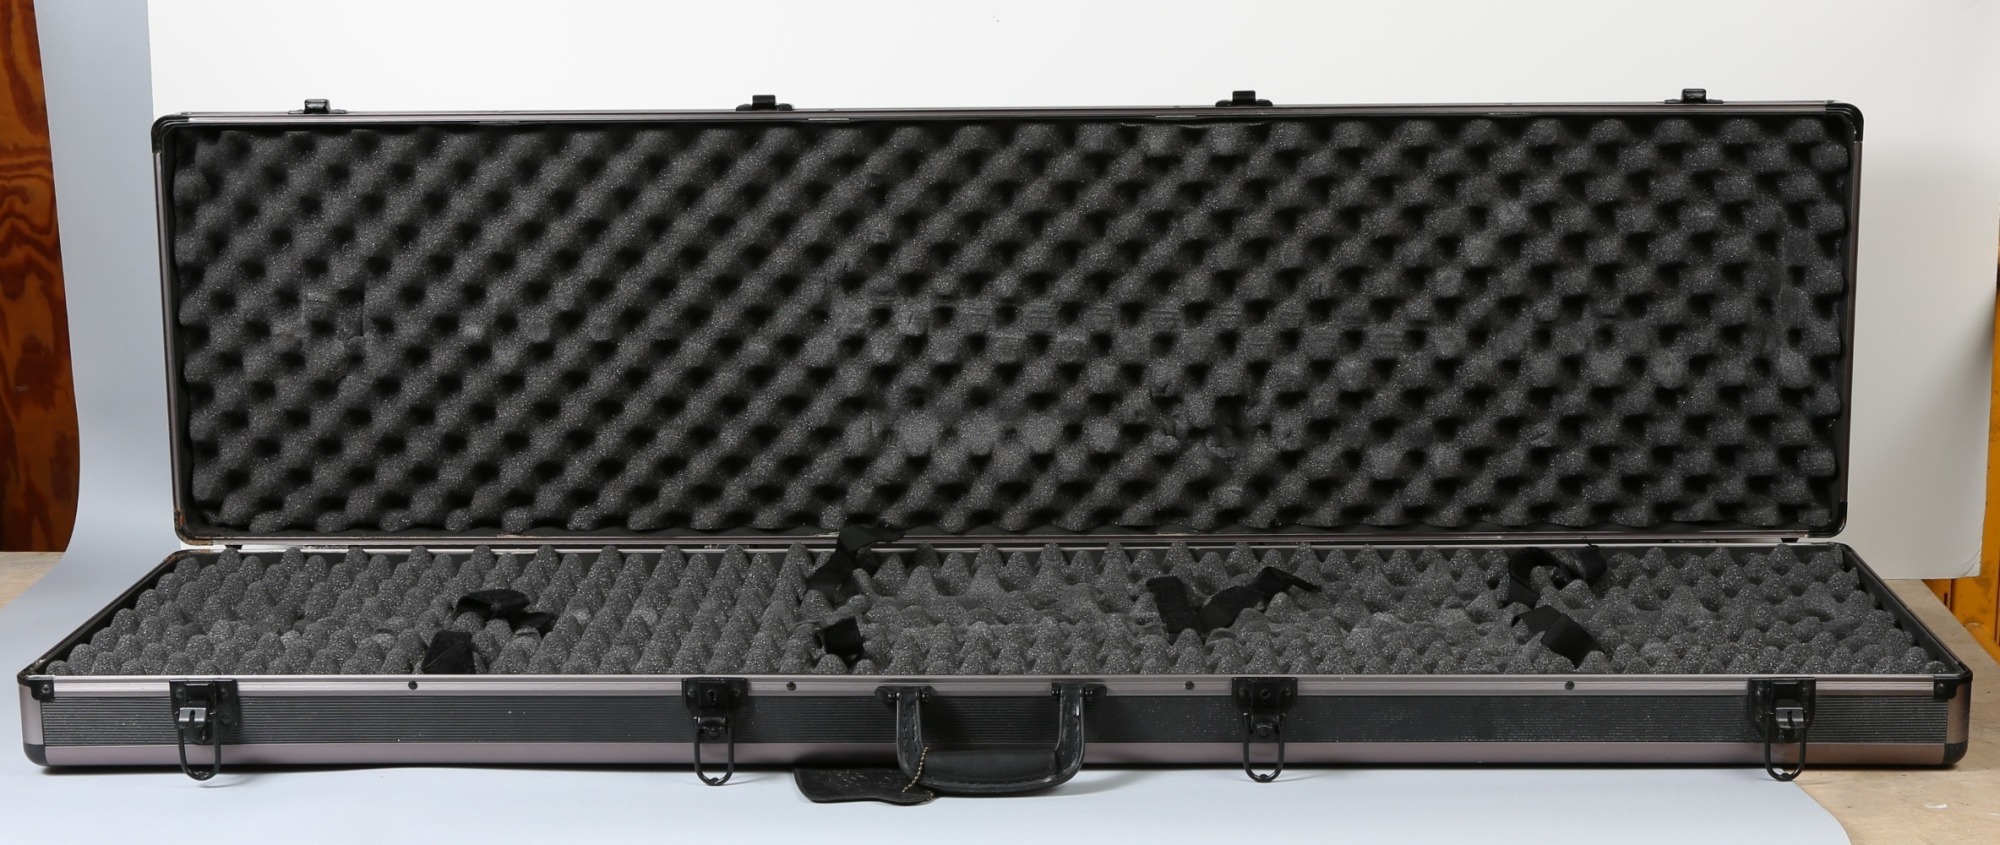 Guide Series carrying case